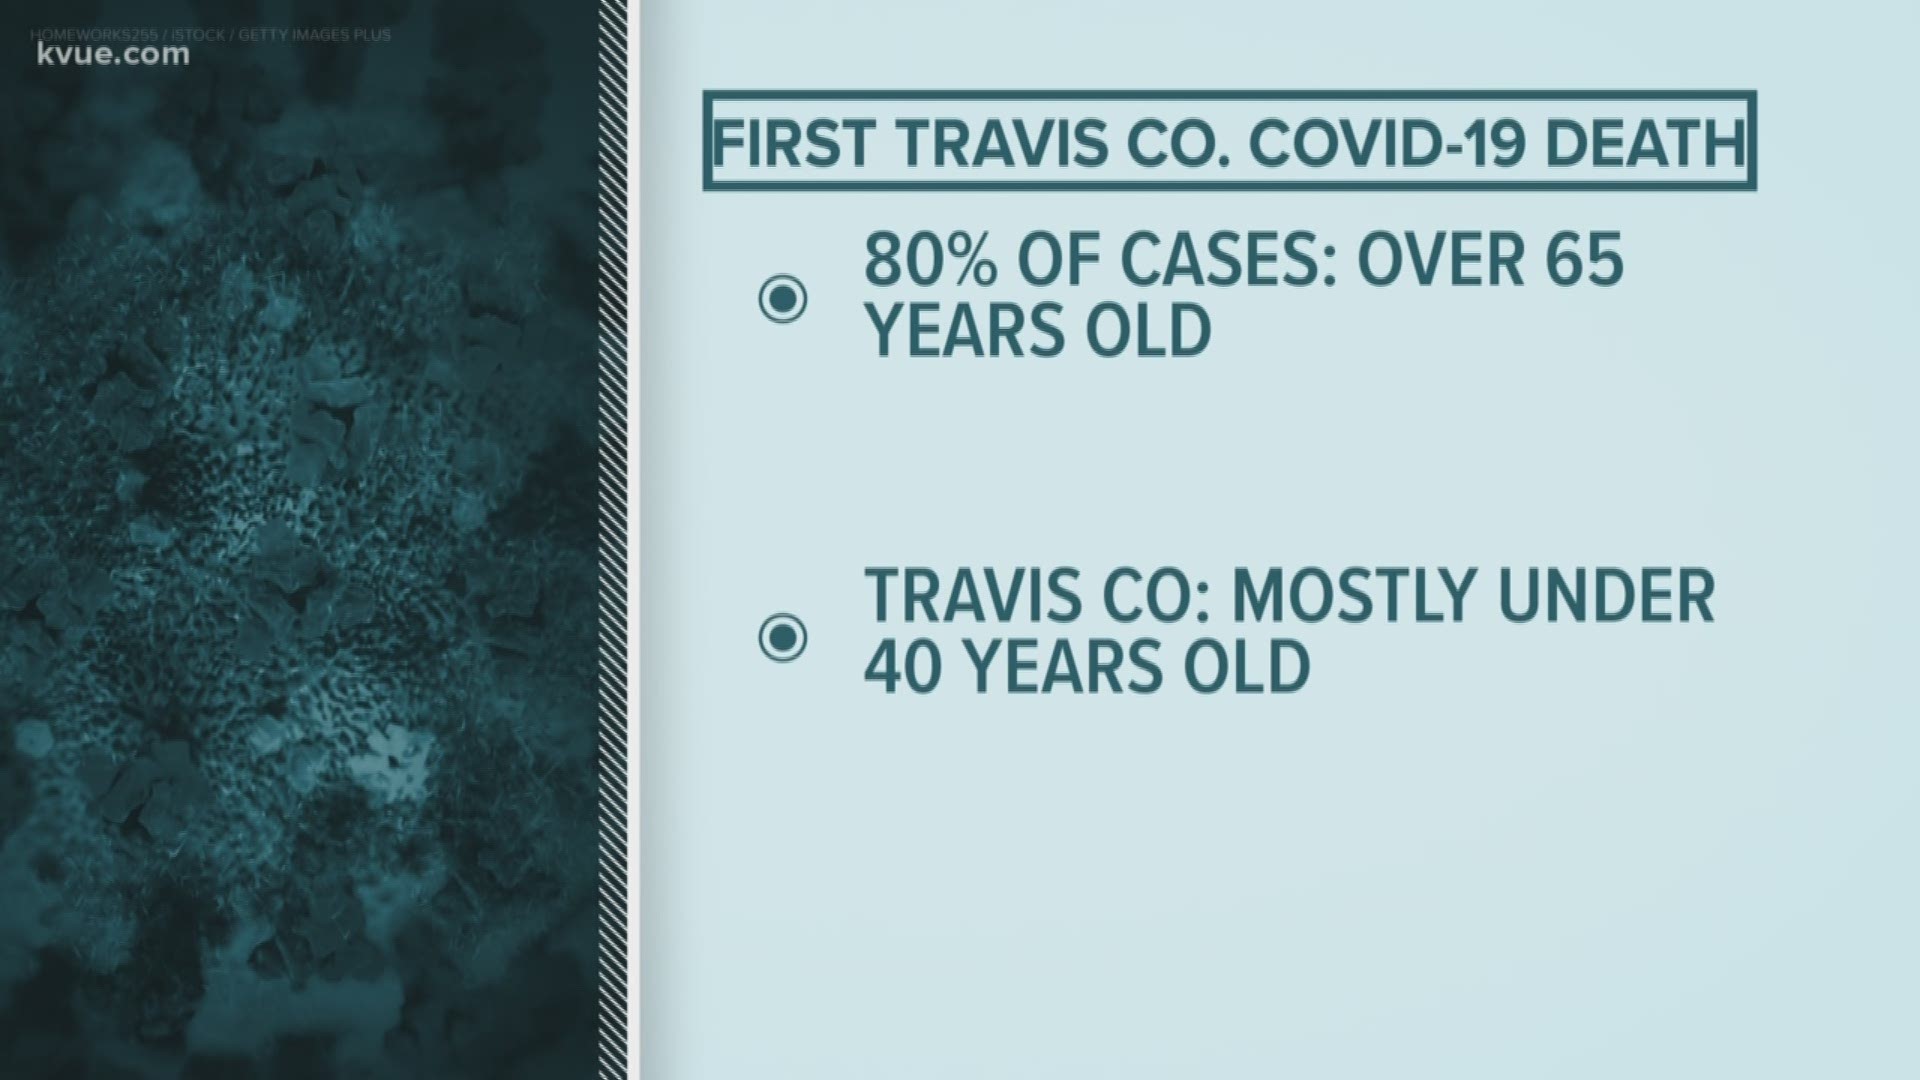 Austin Public Health confirmed the first local coronavirus-related death on March 27.